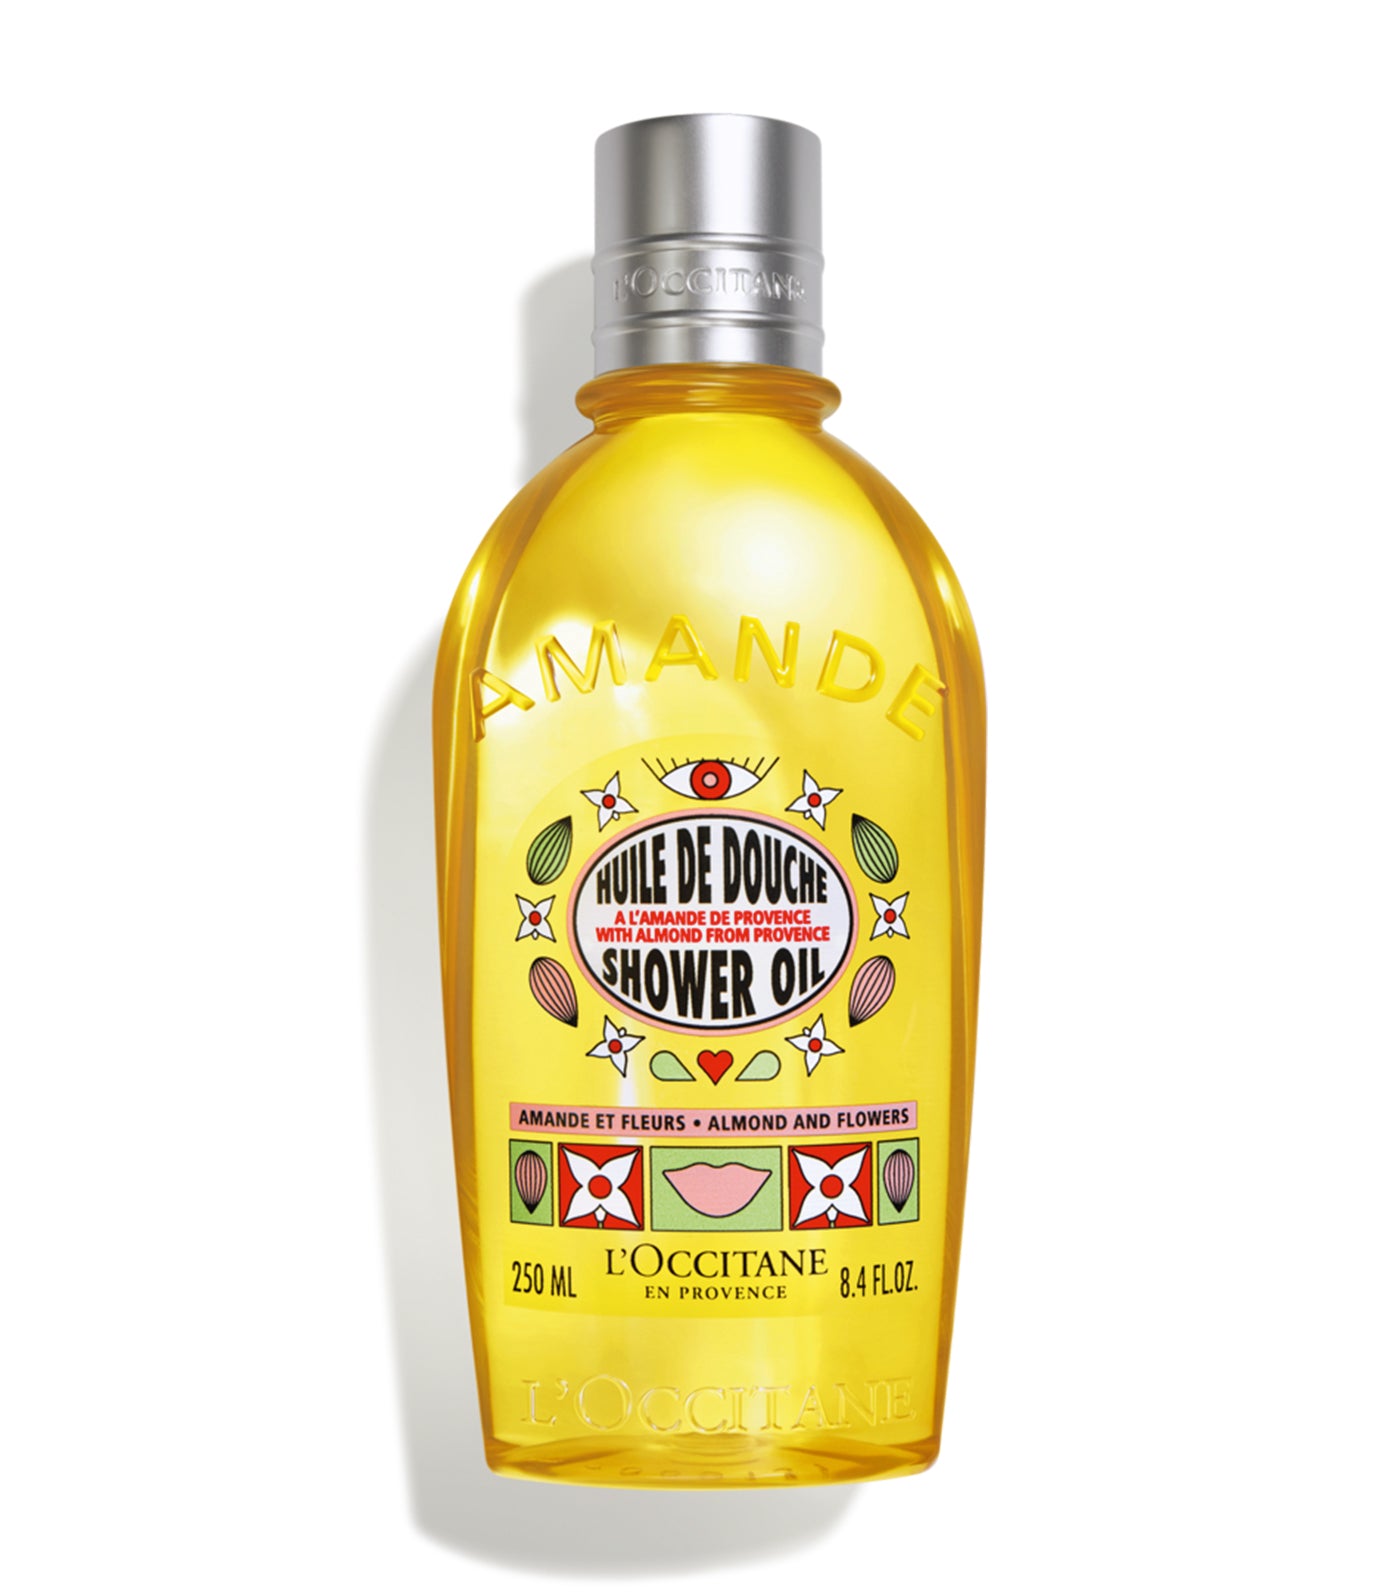 Almond and Flowers Shower Oil